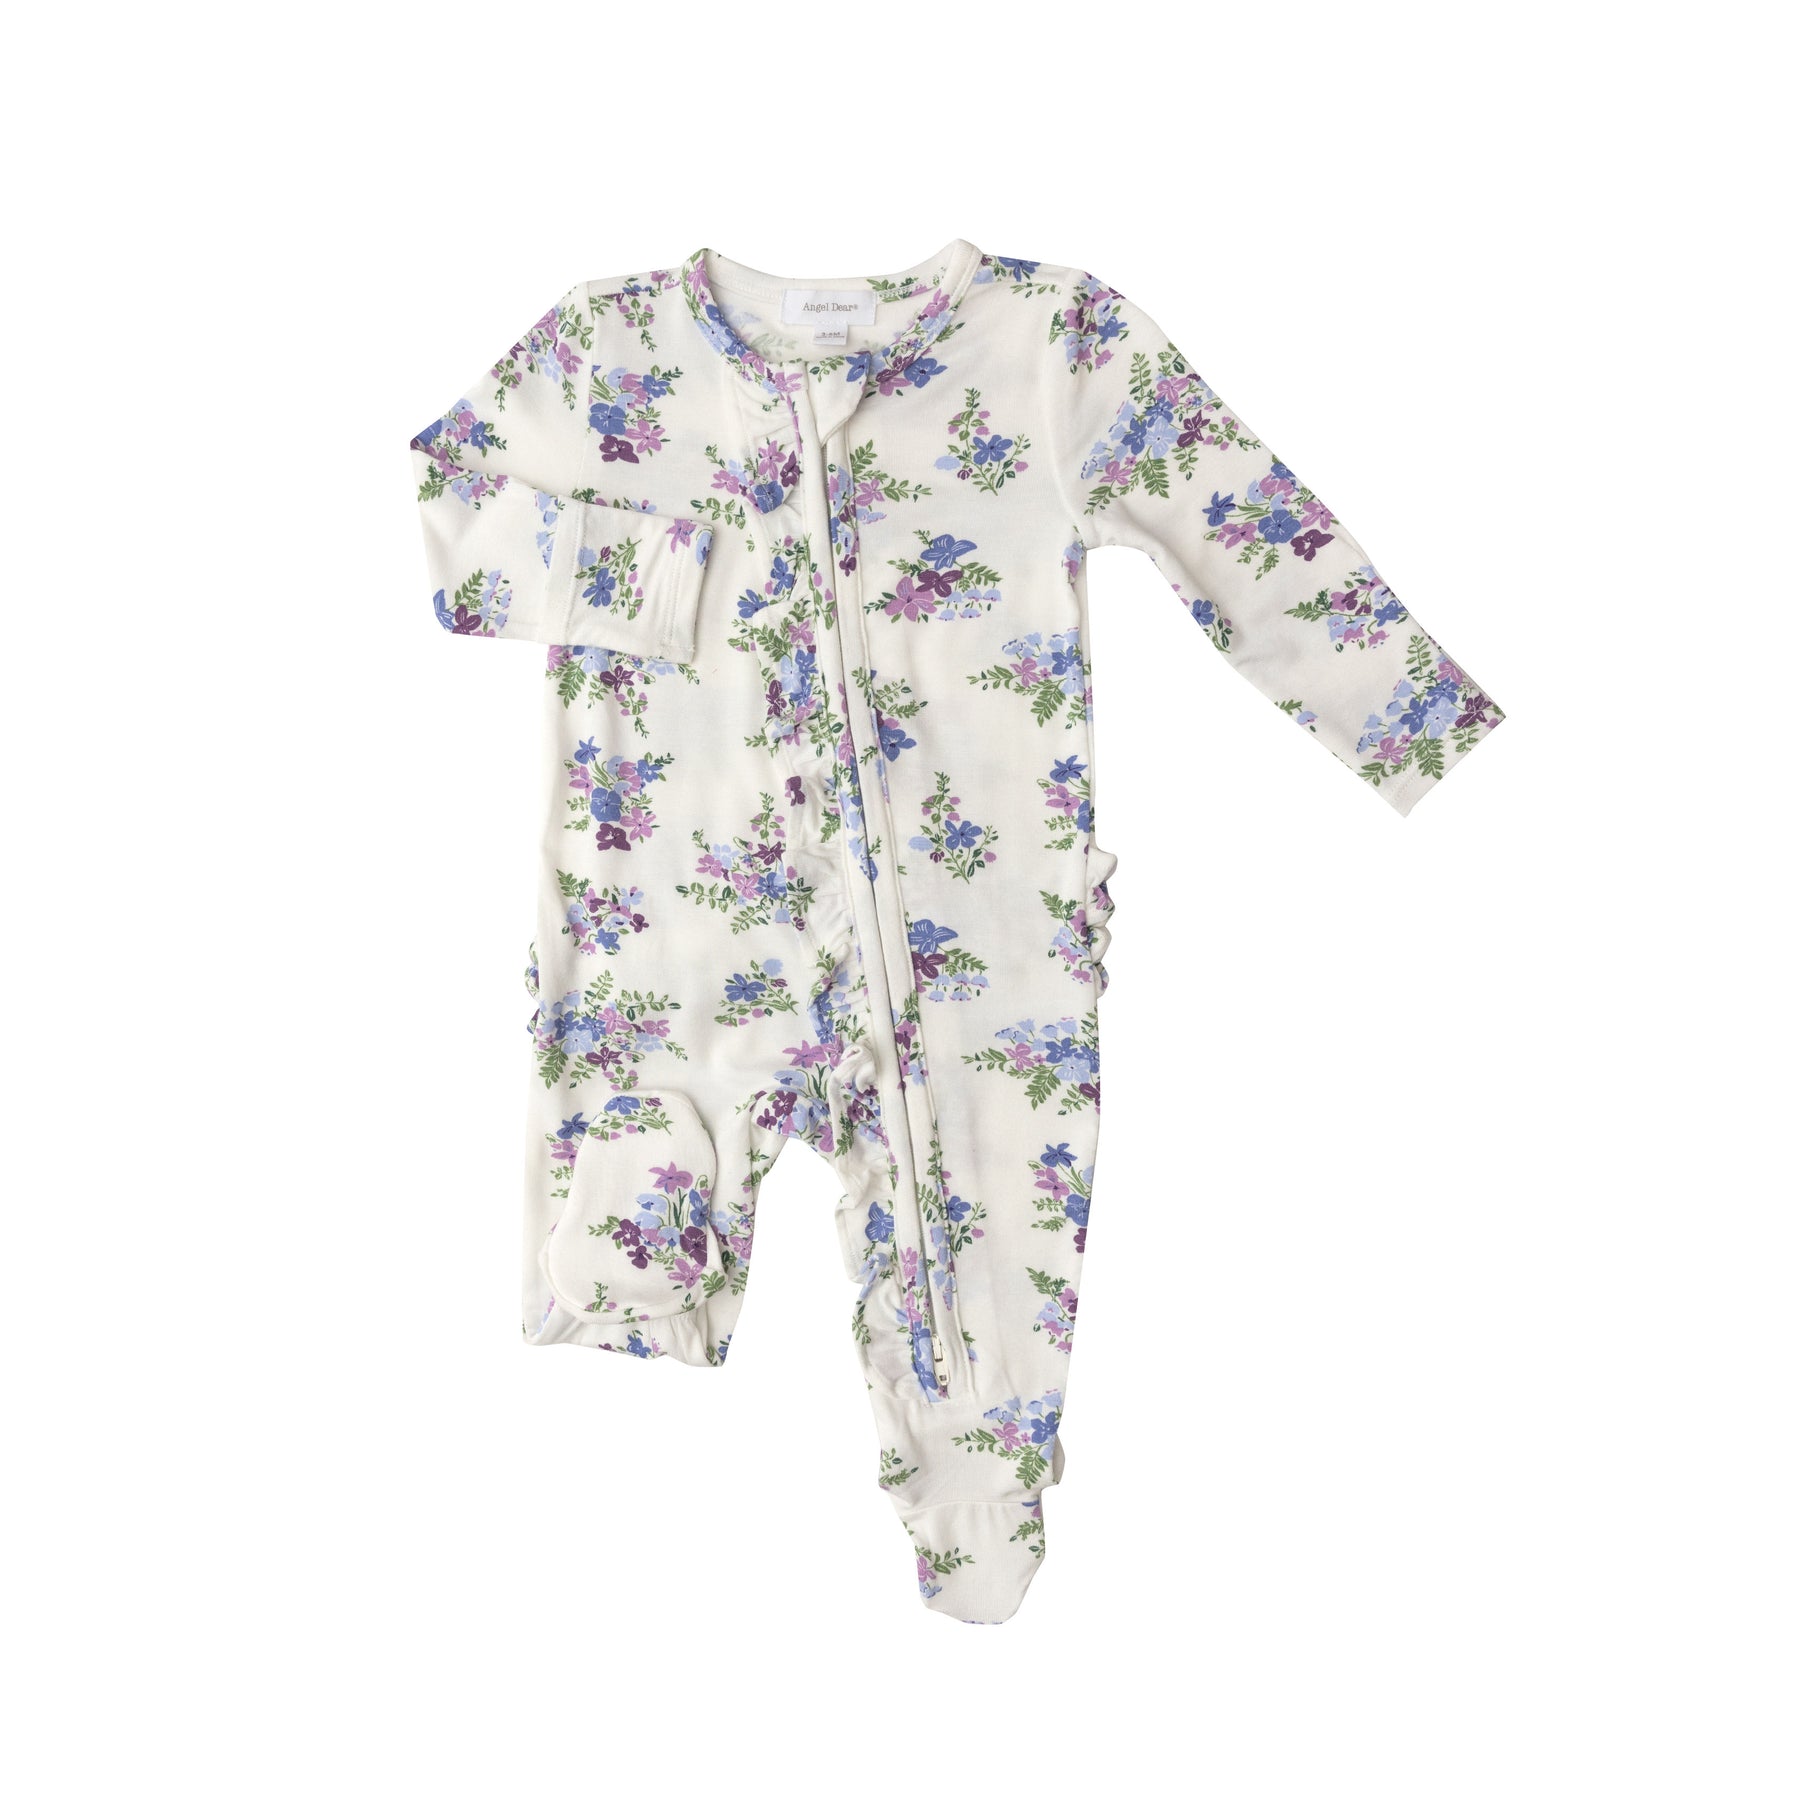 Angel Dear Lily of the Nile Zipper Footie - 0-3 Months